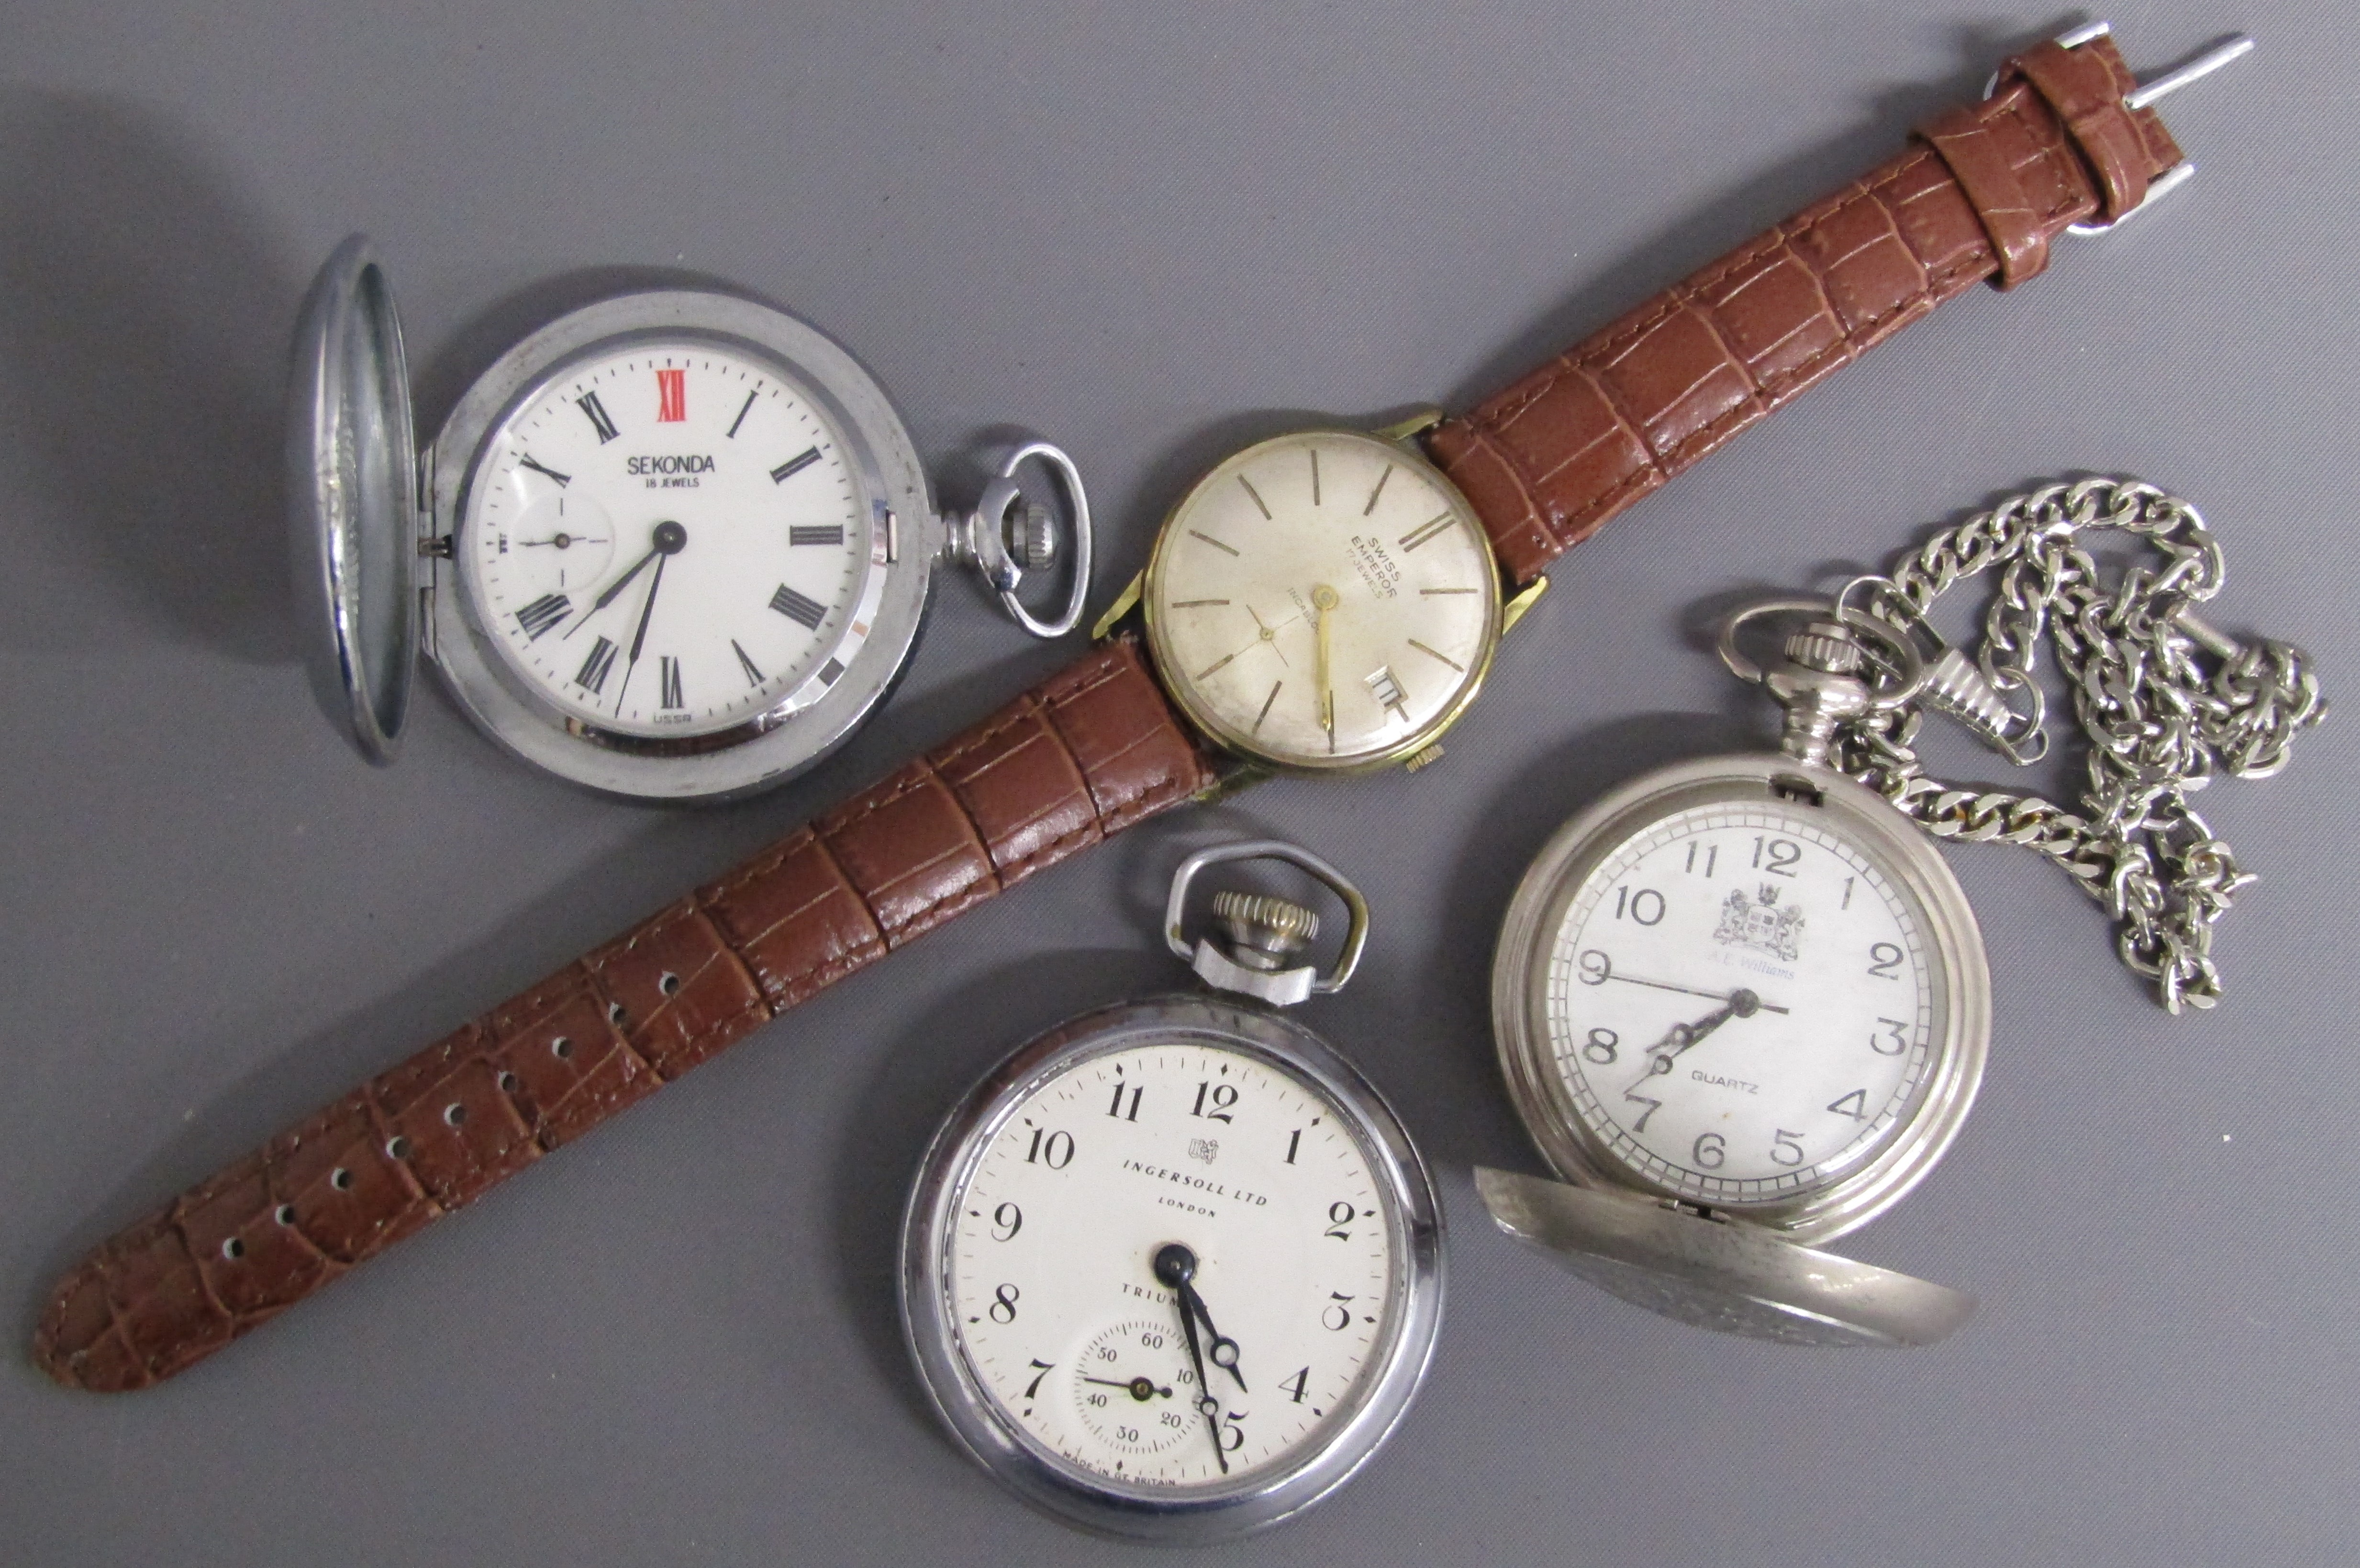 Ingersoll Triumph, A.E Williams and Sekonda pocket watches along with a Swiss Emperor incabloc